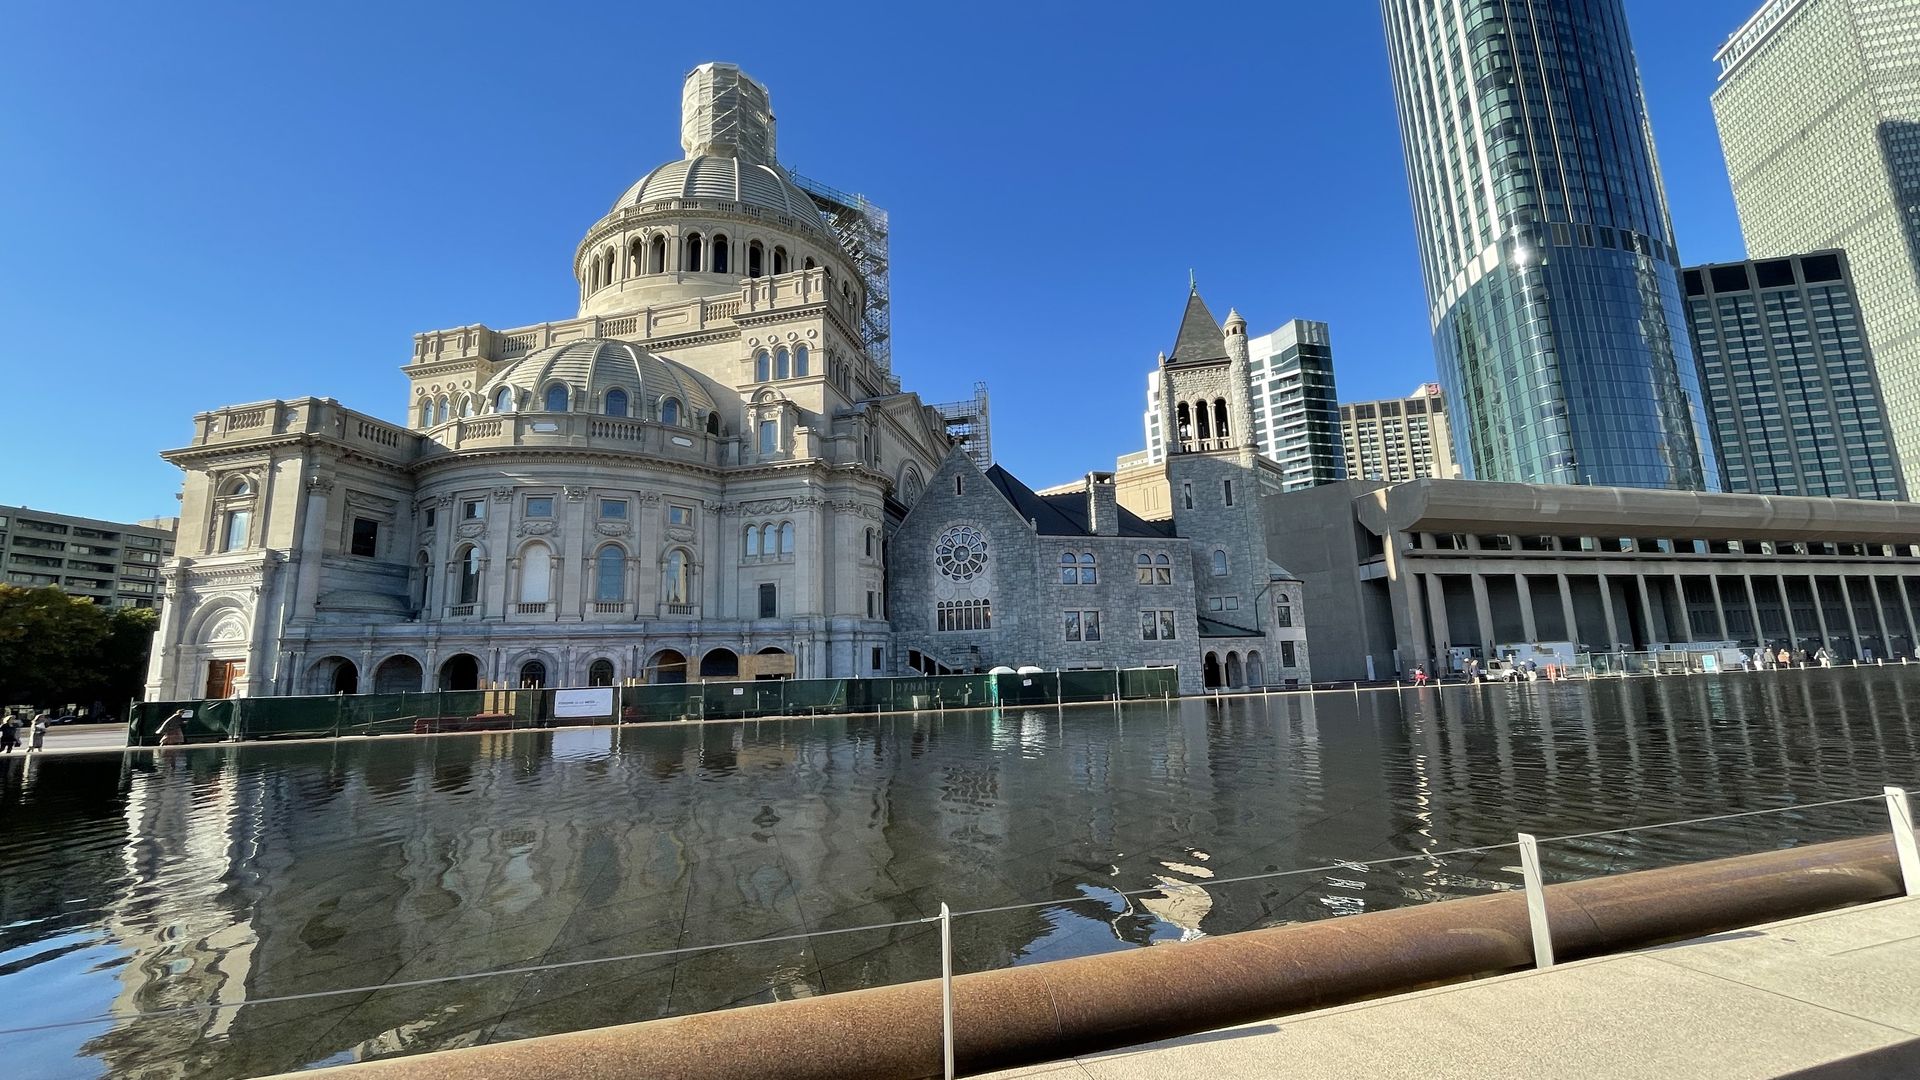 The Christian Science Center stands on the plaza near a reflecting pool.